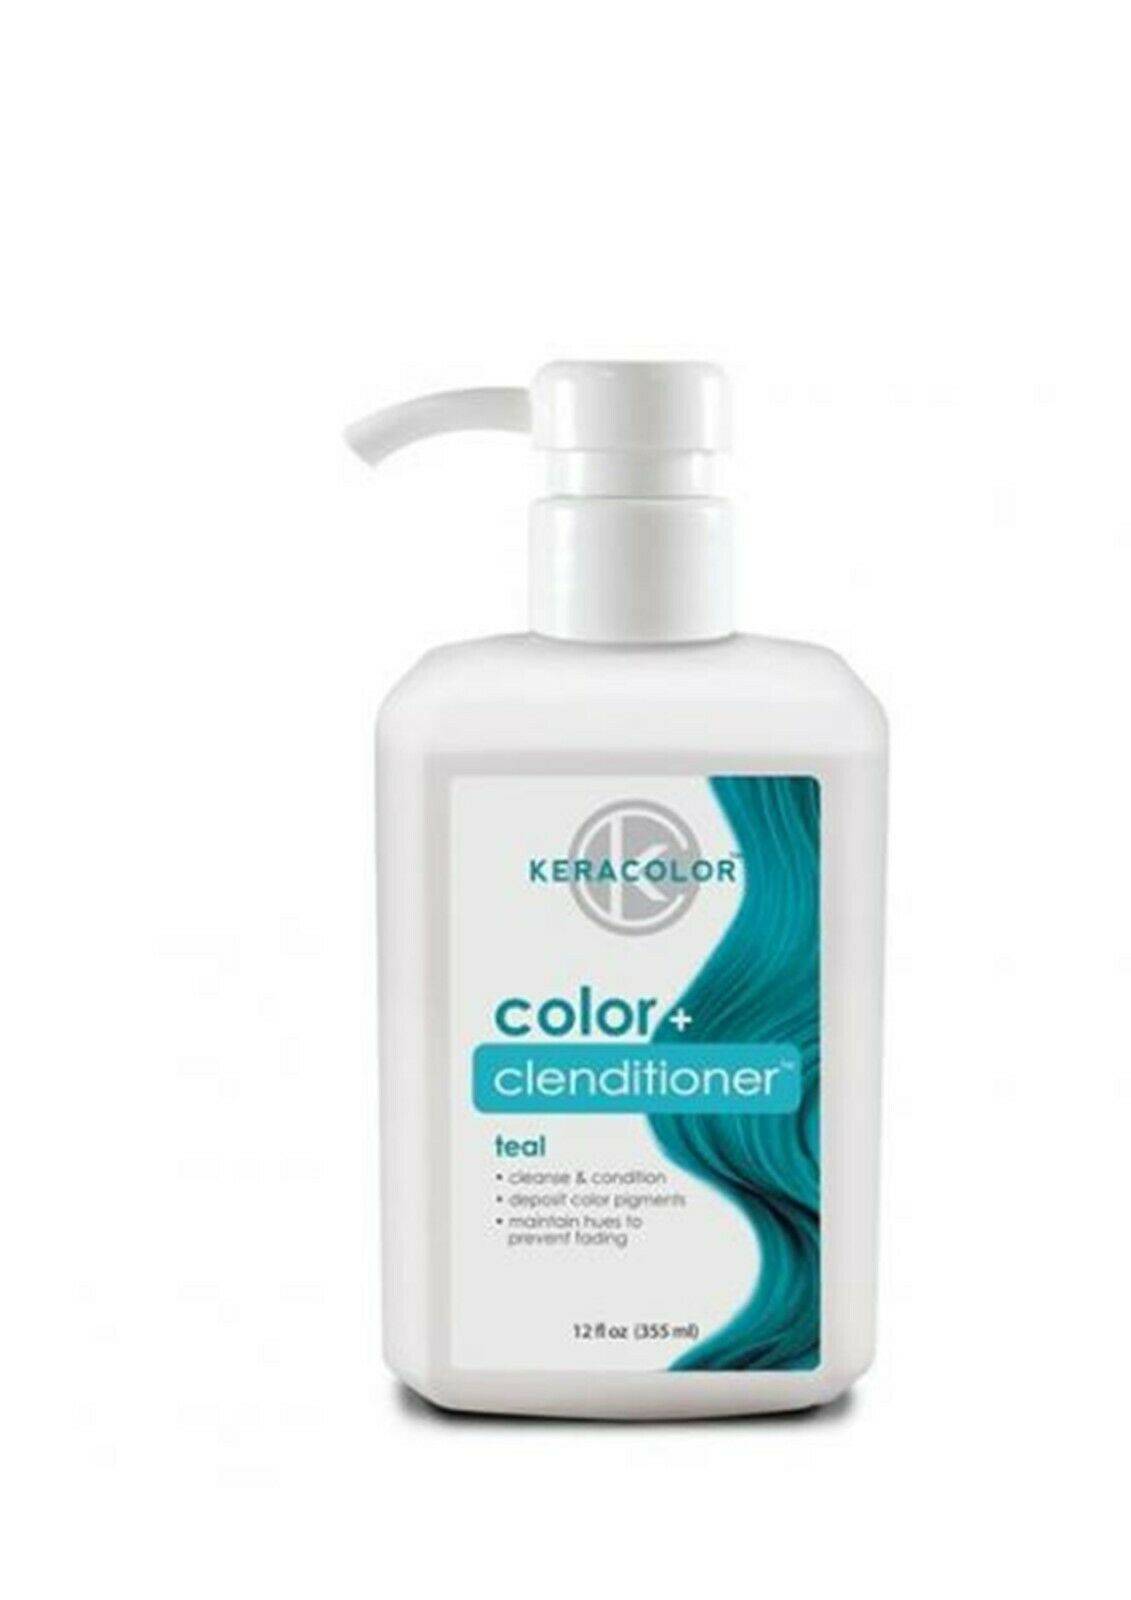 Keracolor Color Clenditioner Colour Shampoo TEAL 355ml - On Line Hair Depot